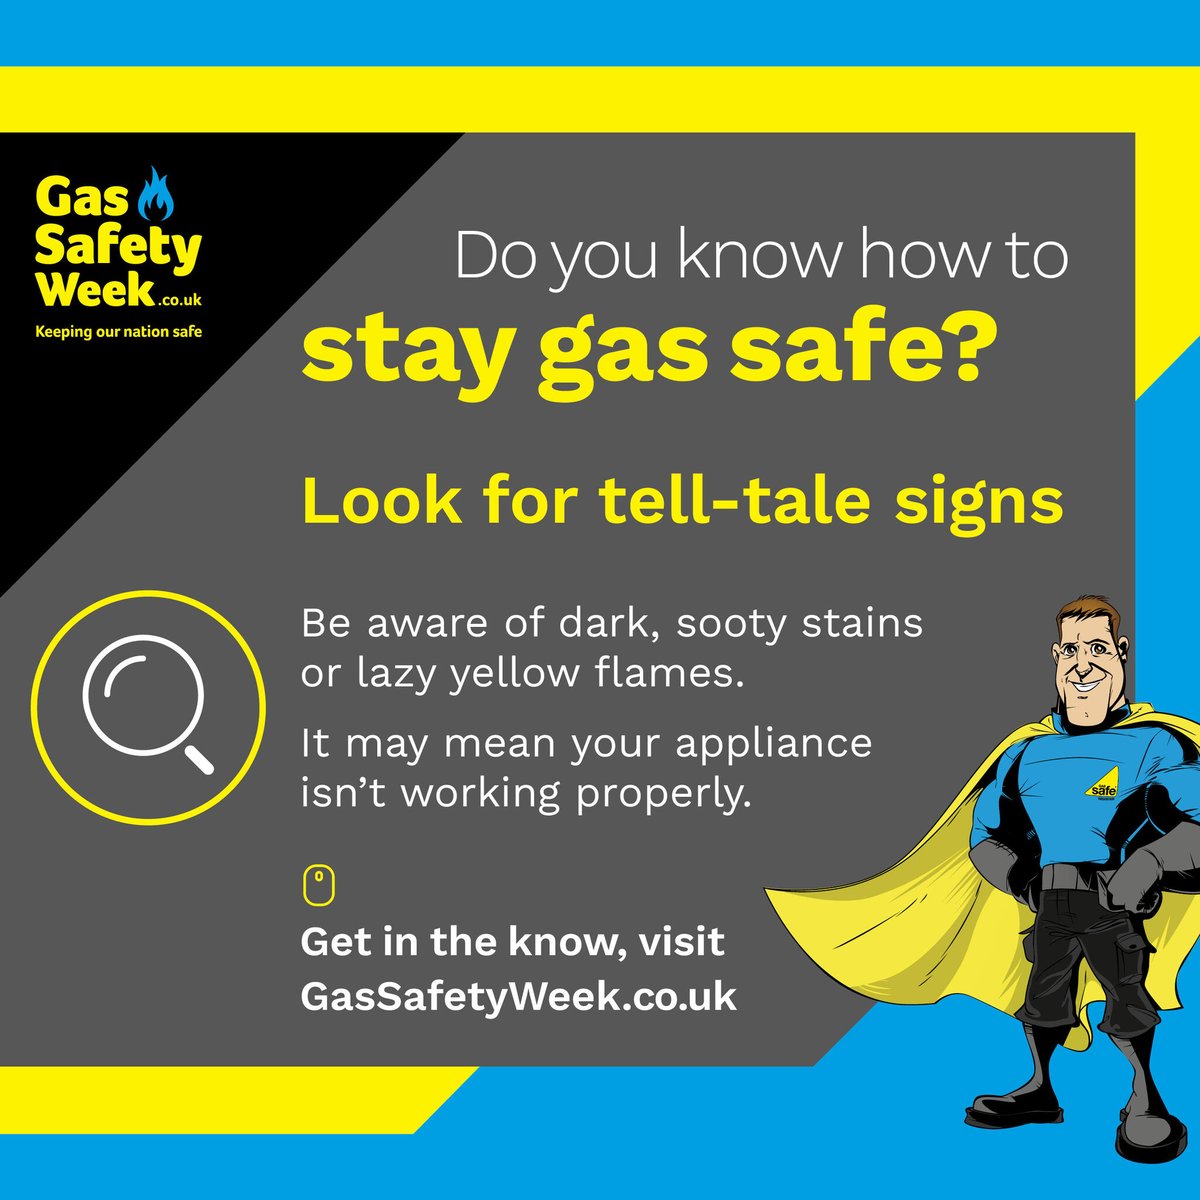 It’s essential to stay aware of vital gas safety advice as we go into the winter months. Look for signs of unsafe gas appliances, such as a lazy yellow flame, boiler errors, and uncommon noises.. #GSW23 #GasSafetyWeek